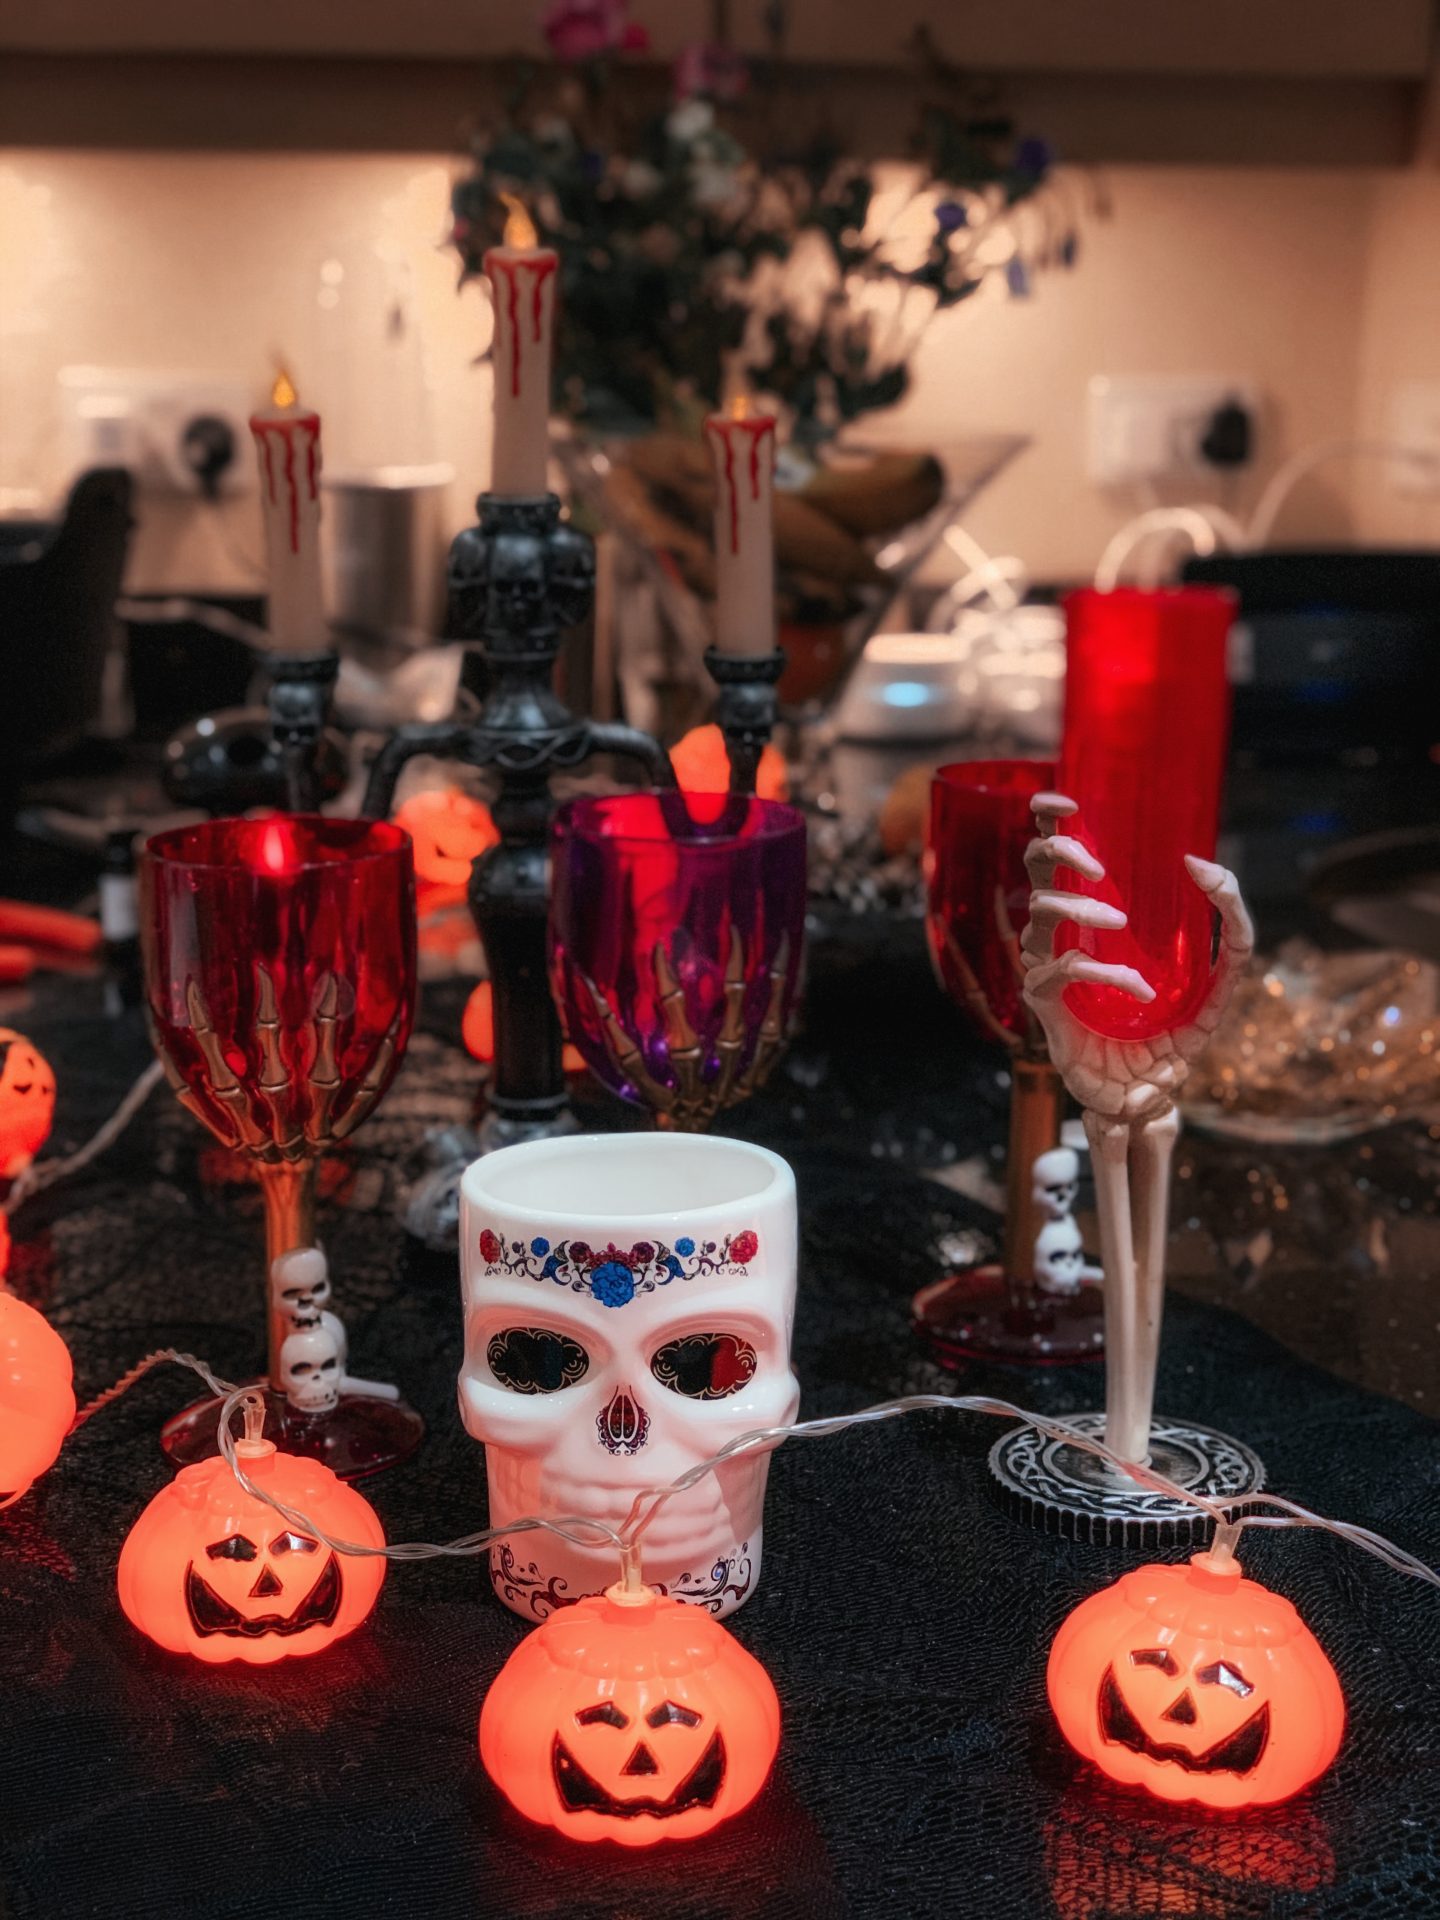 Halloween Ideas - costumes, decorations, cocktails, spooky food.